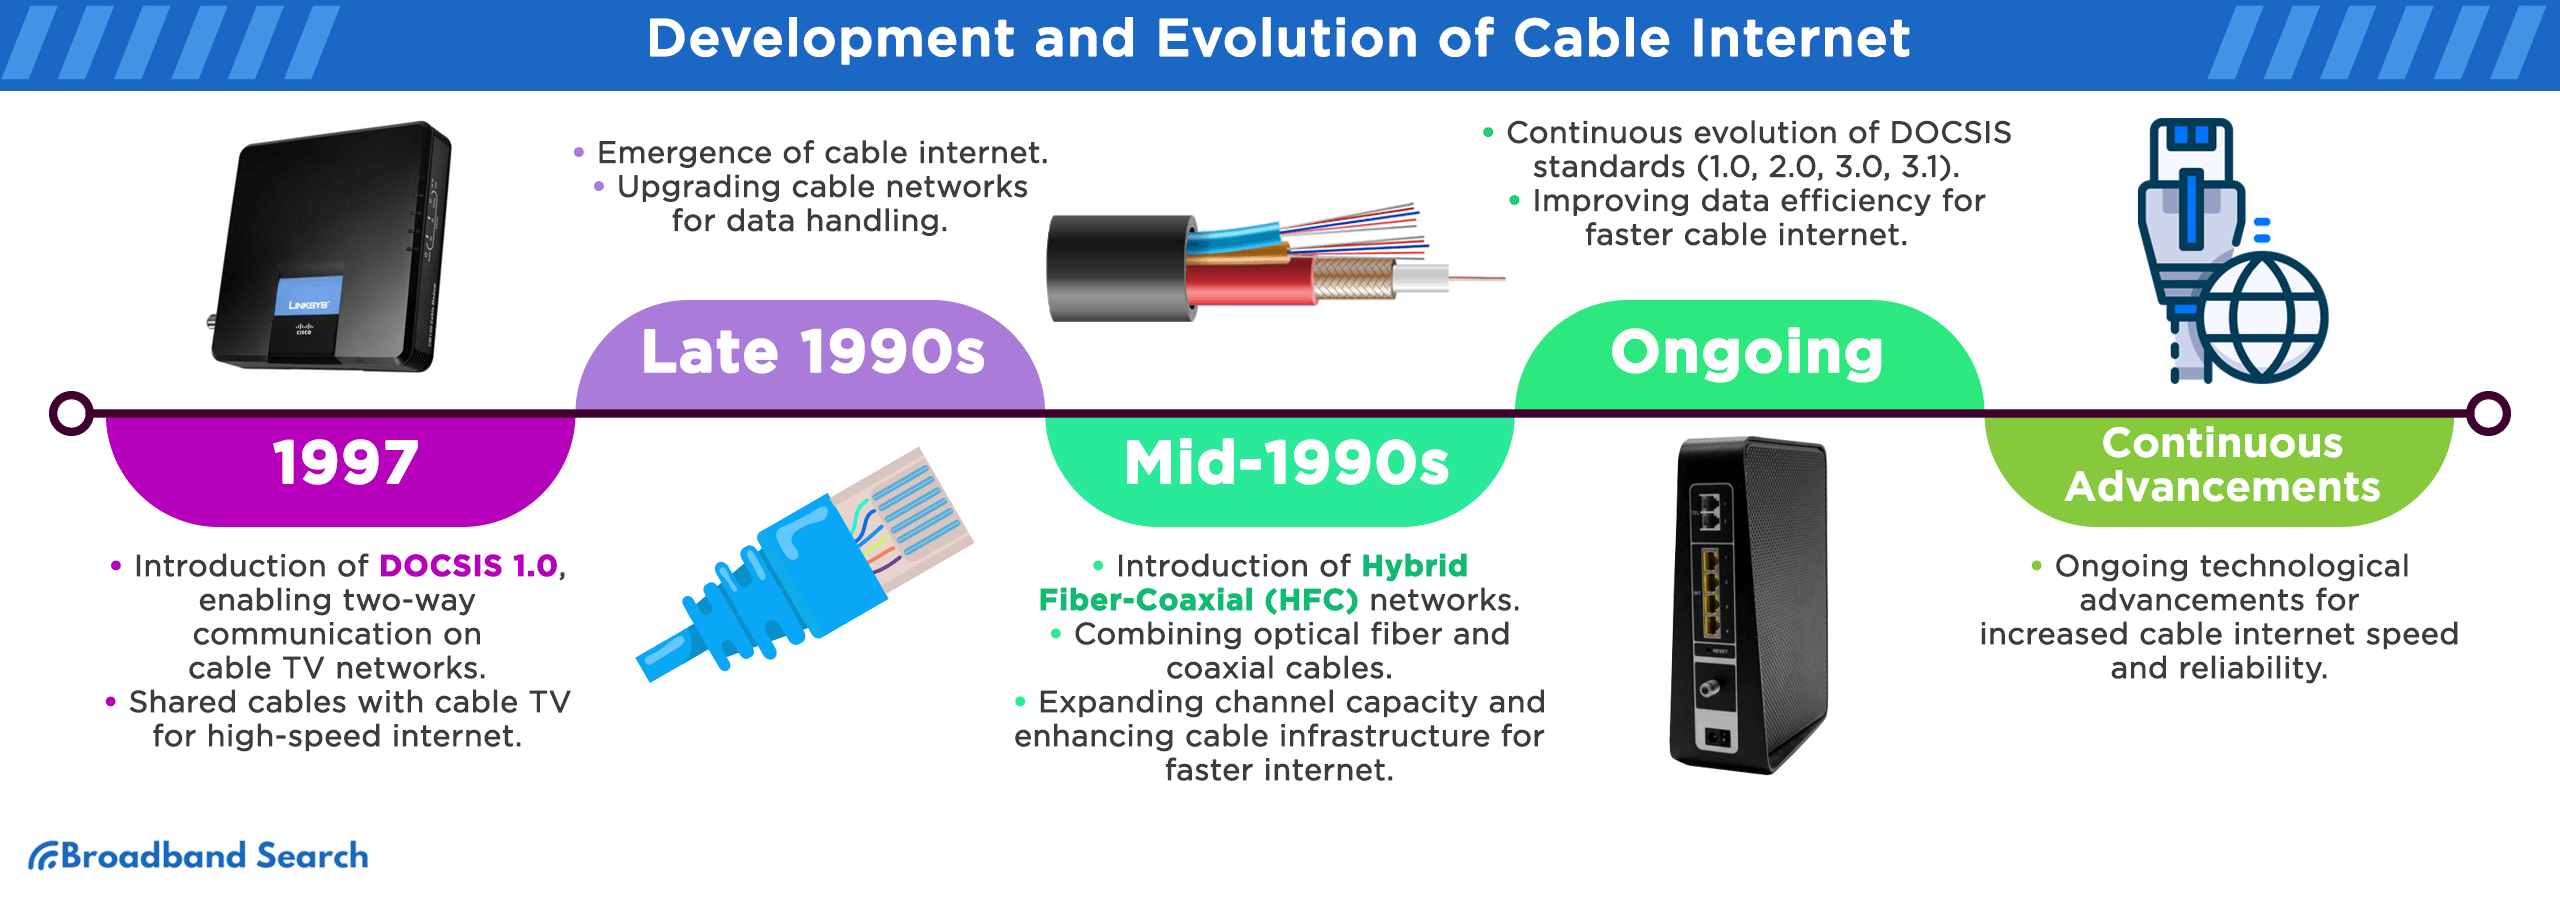 Development and evolution timeline of cable internet